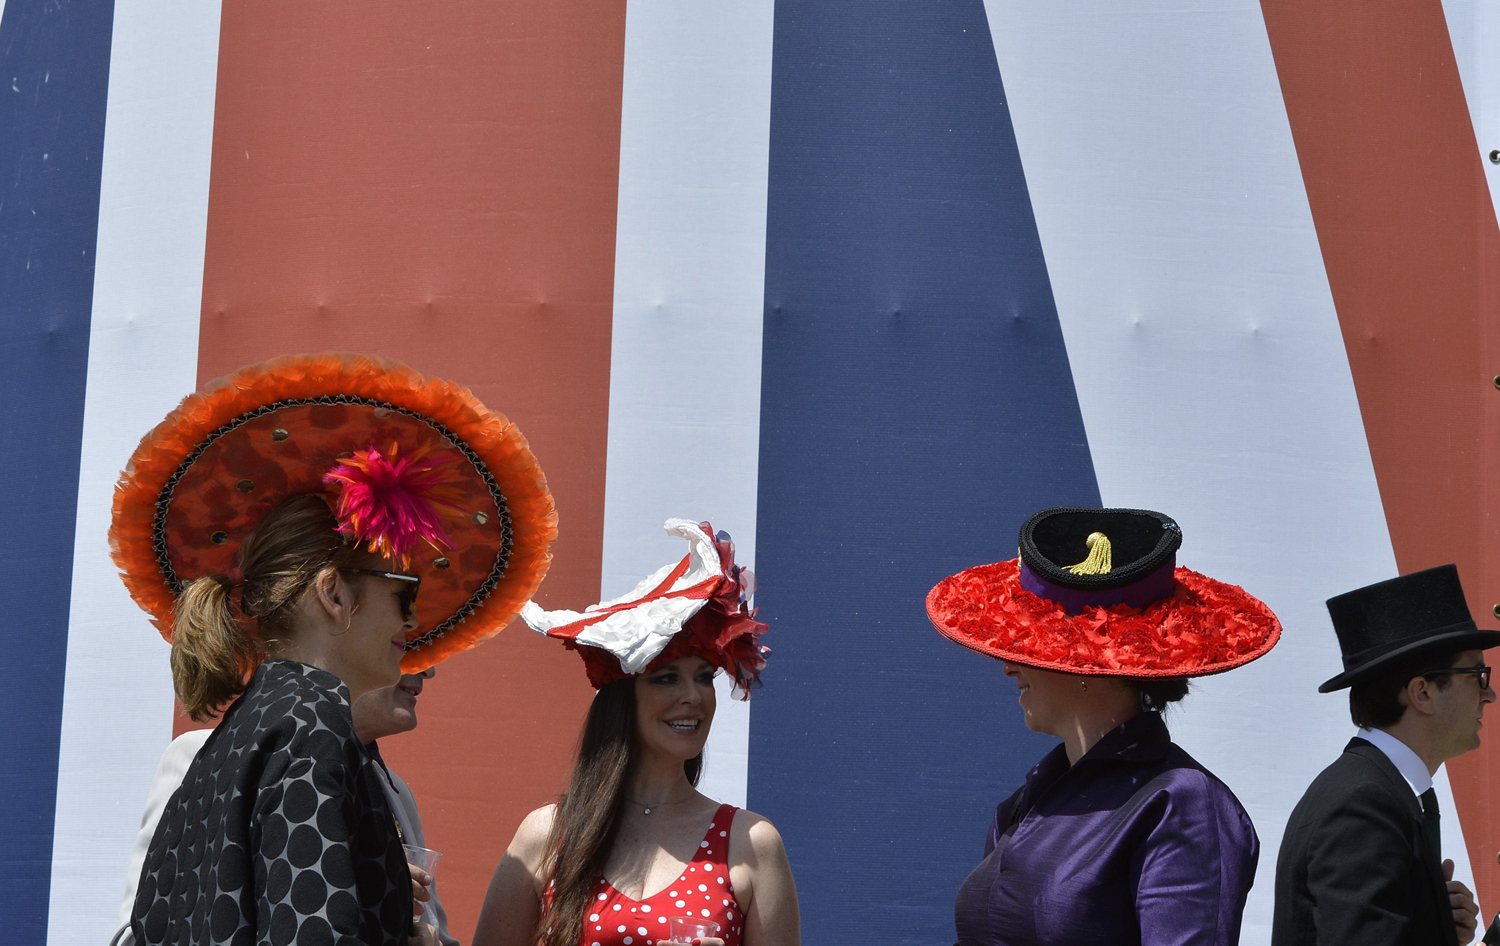 Racegoers attend the first day of the Royal Ascot horse racing festival at Ascot, southern England June 17, 2014.